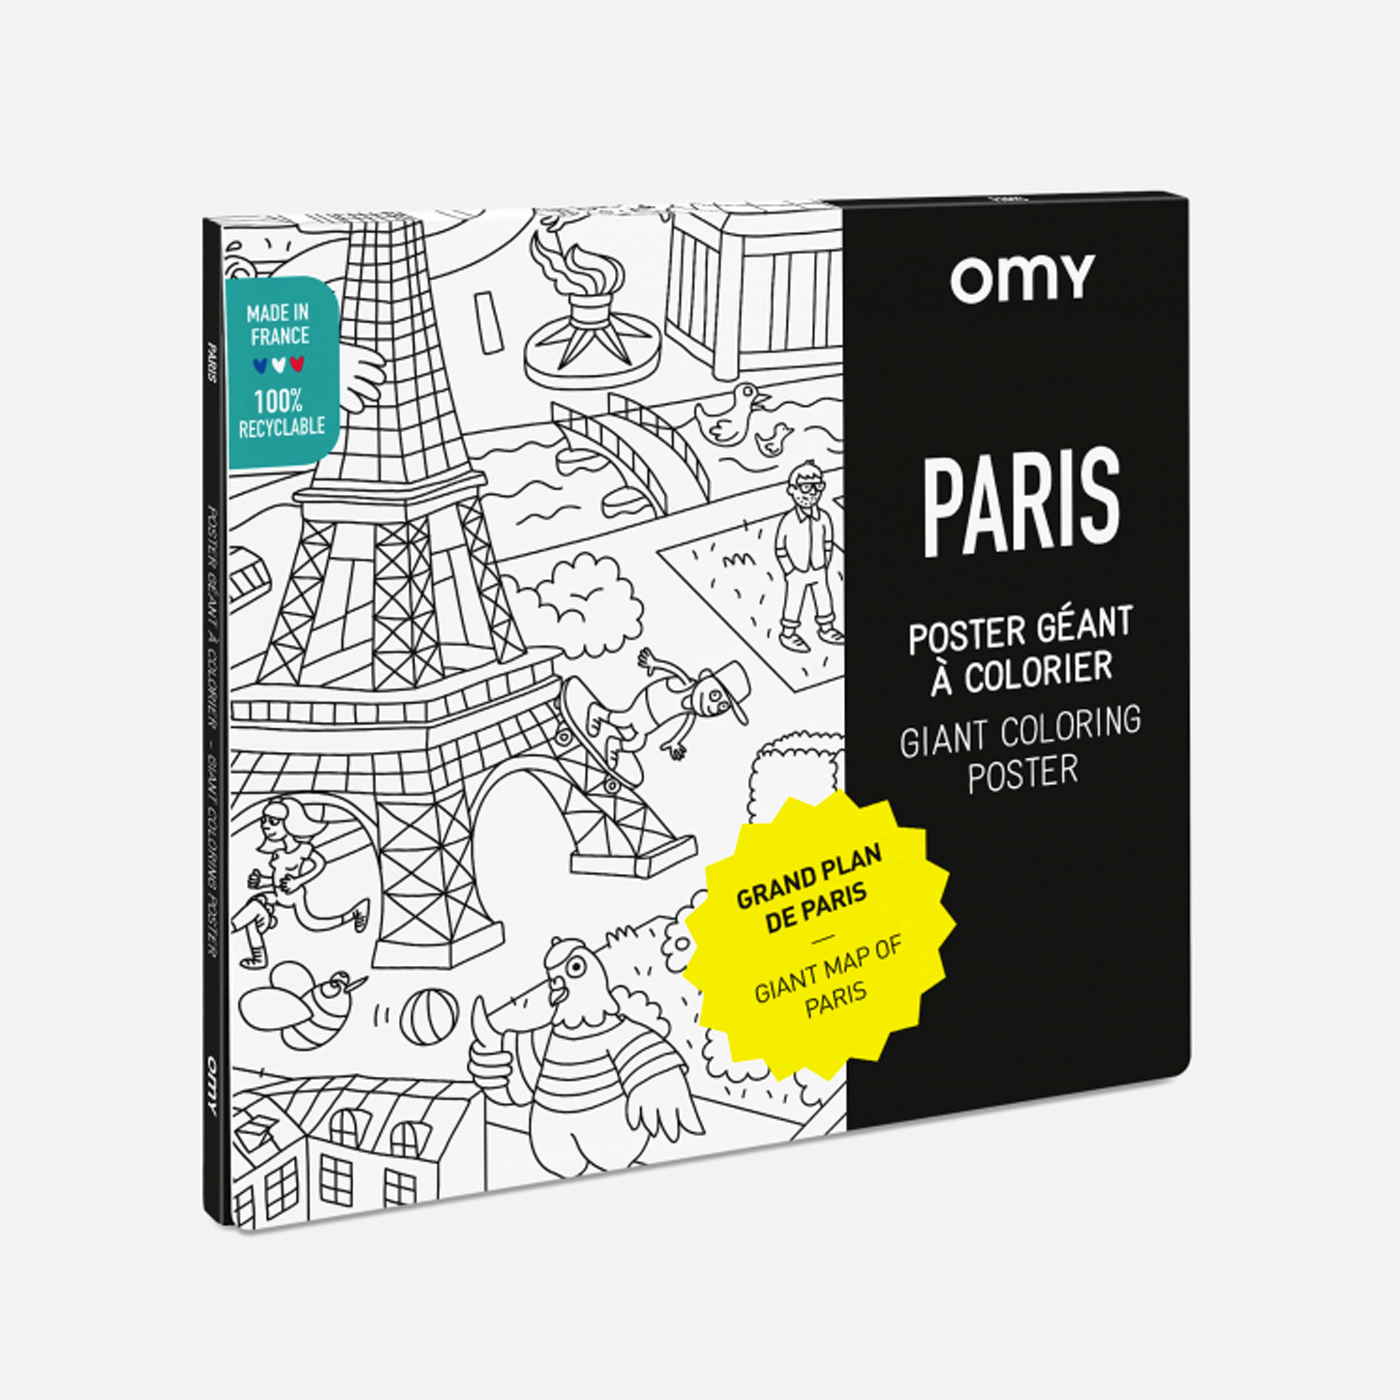  Omy Coloring Poster  | Paris